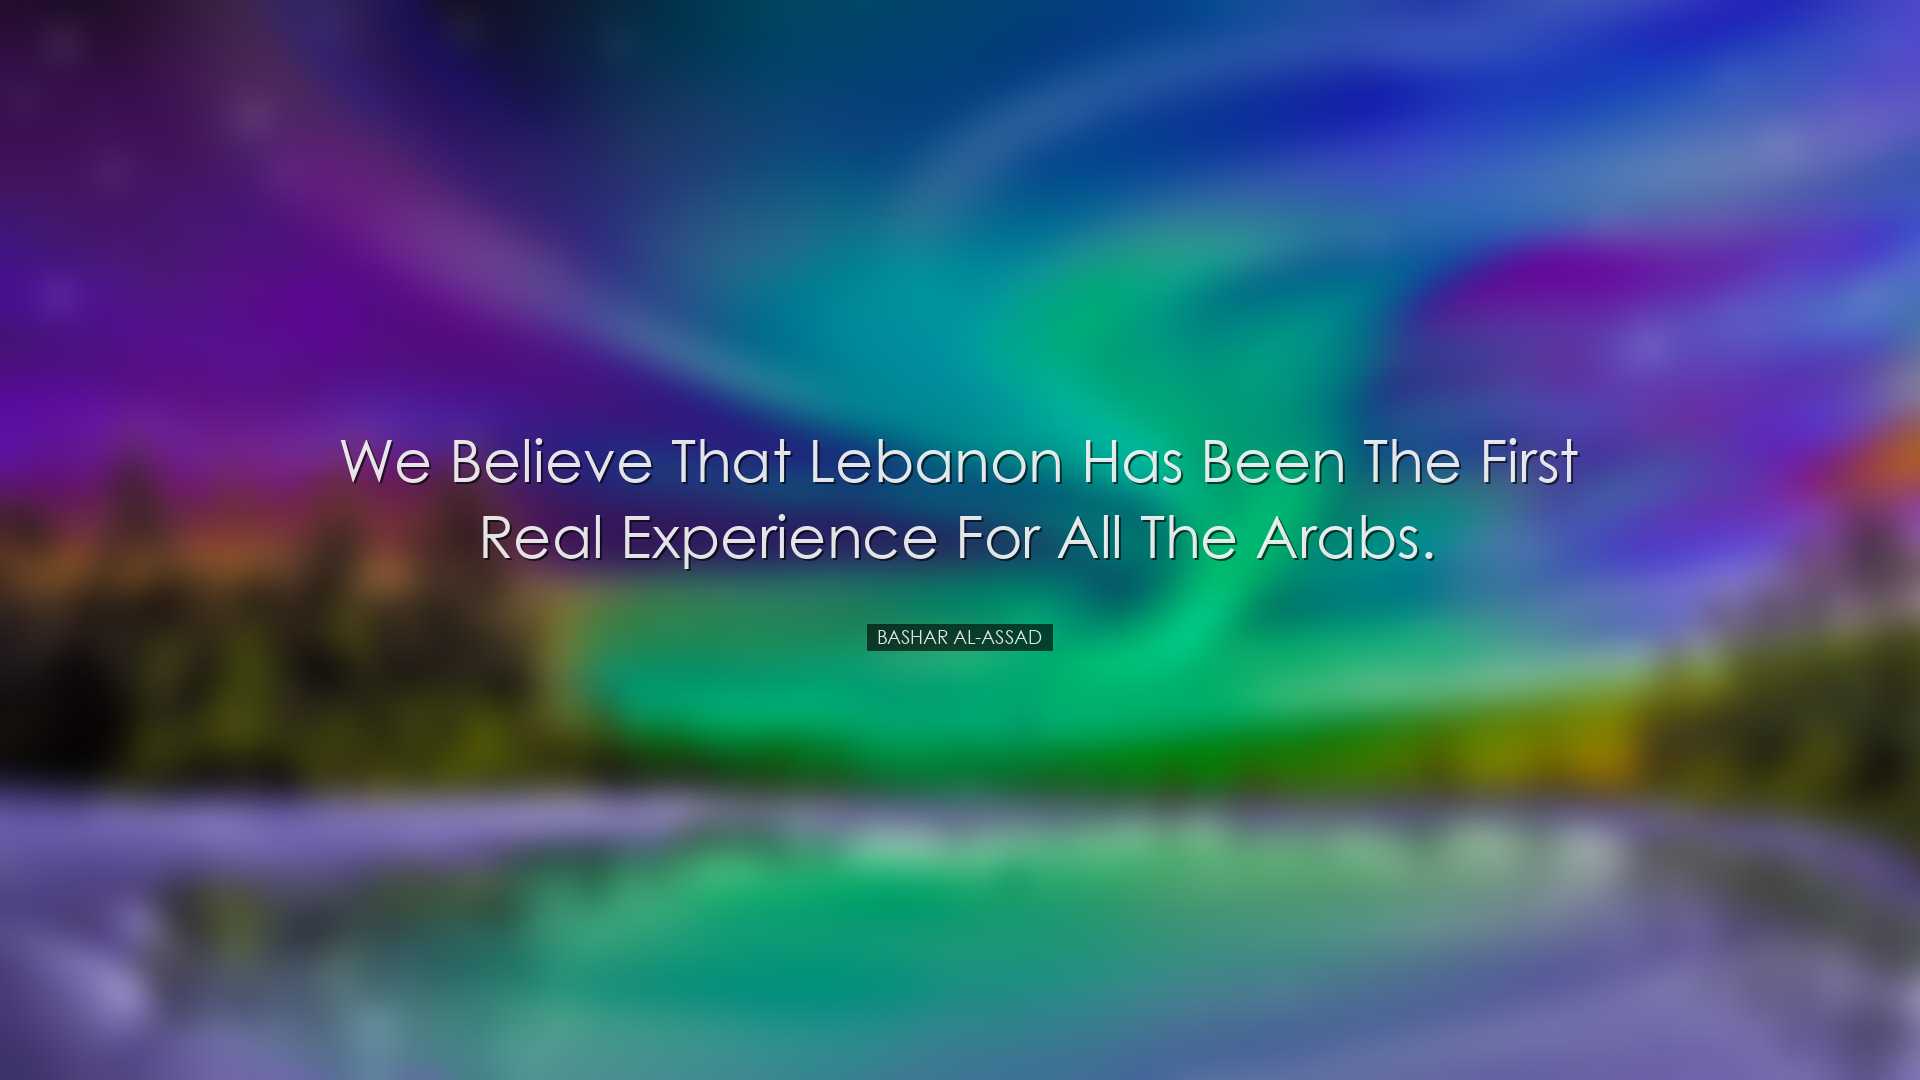 We believe that Lebanon has been the first real experience for all